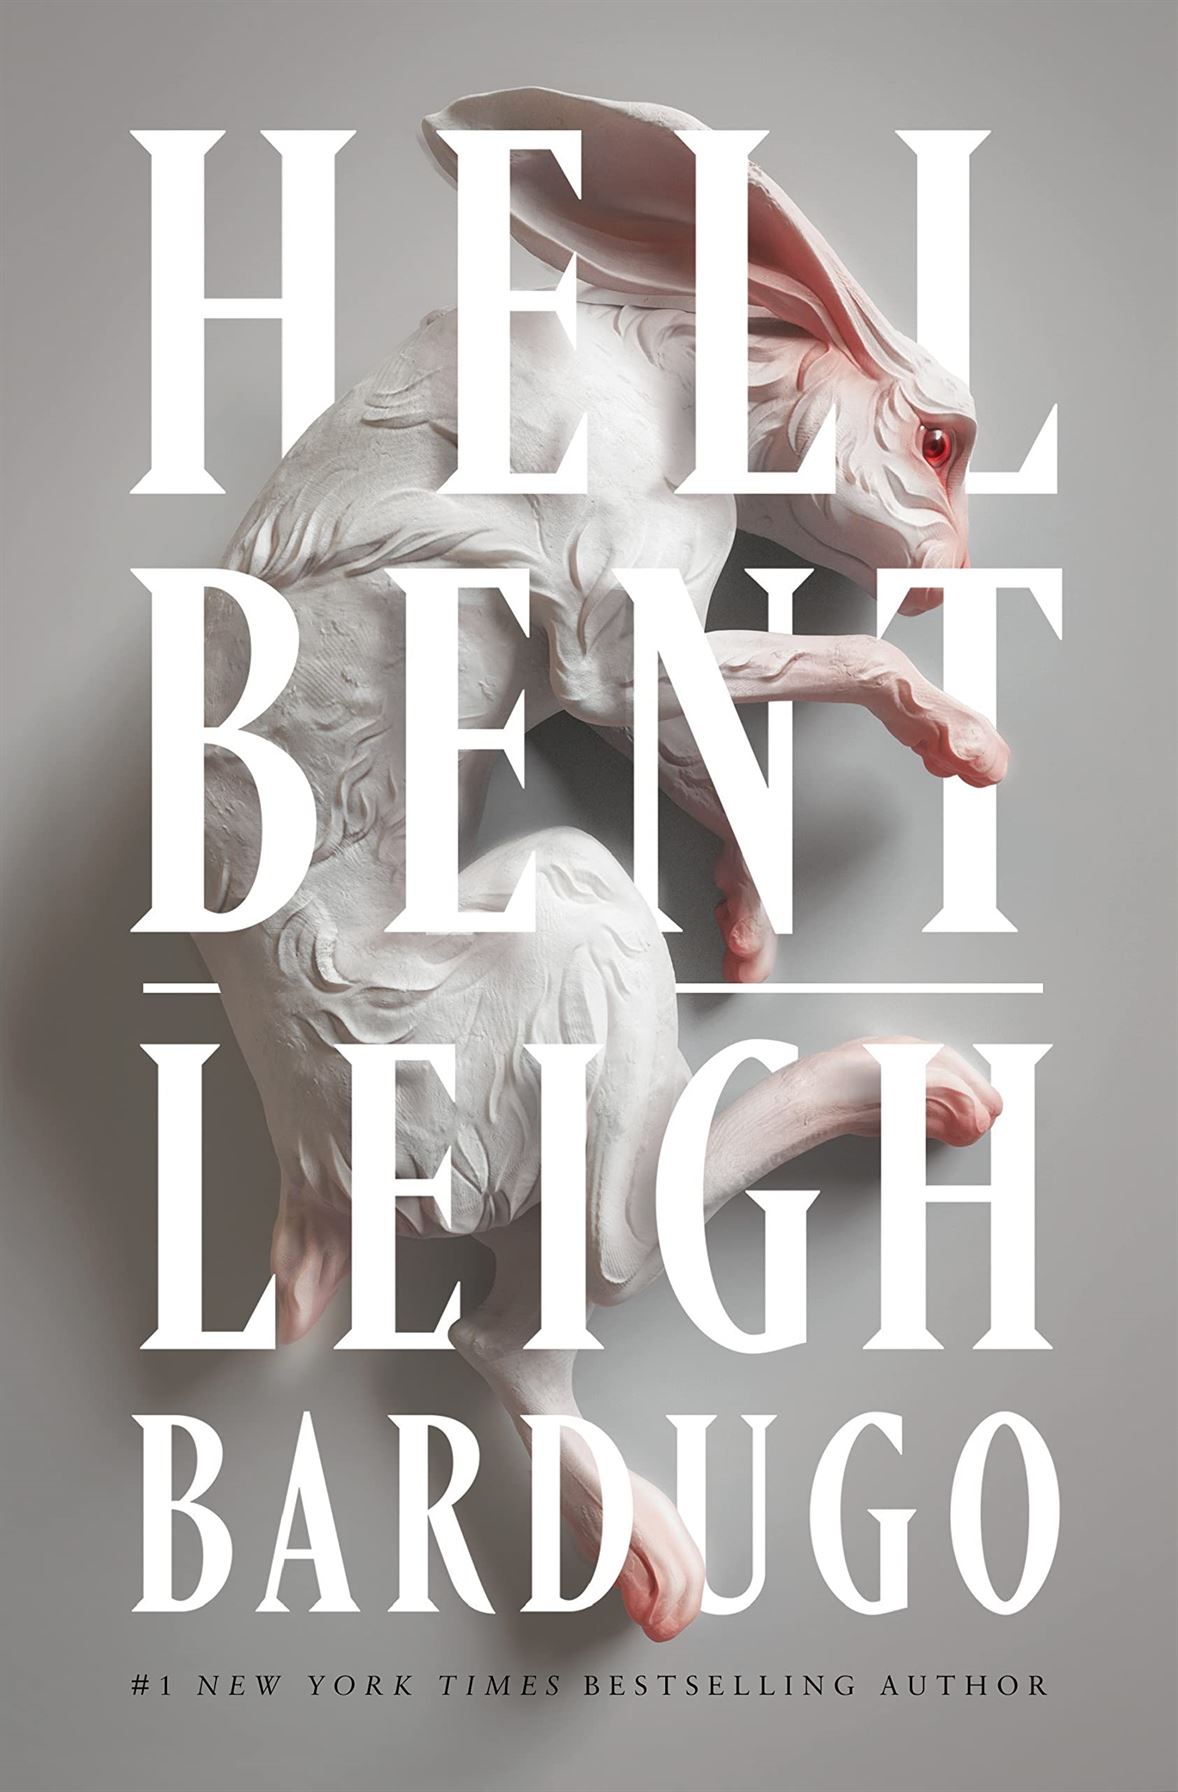 "Hell Bent" by Leigh Bardugo is a sequel to "Ninth House."
Photo courtesy of Leigh Bardugo